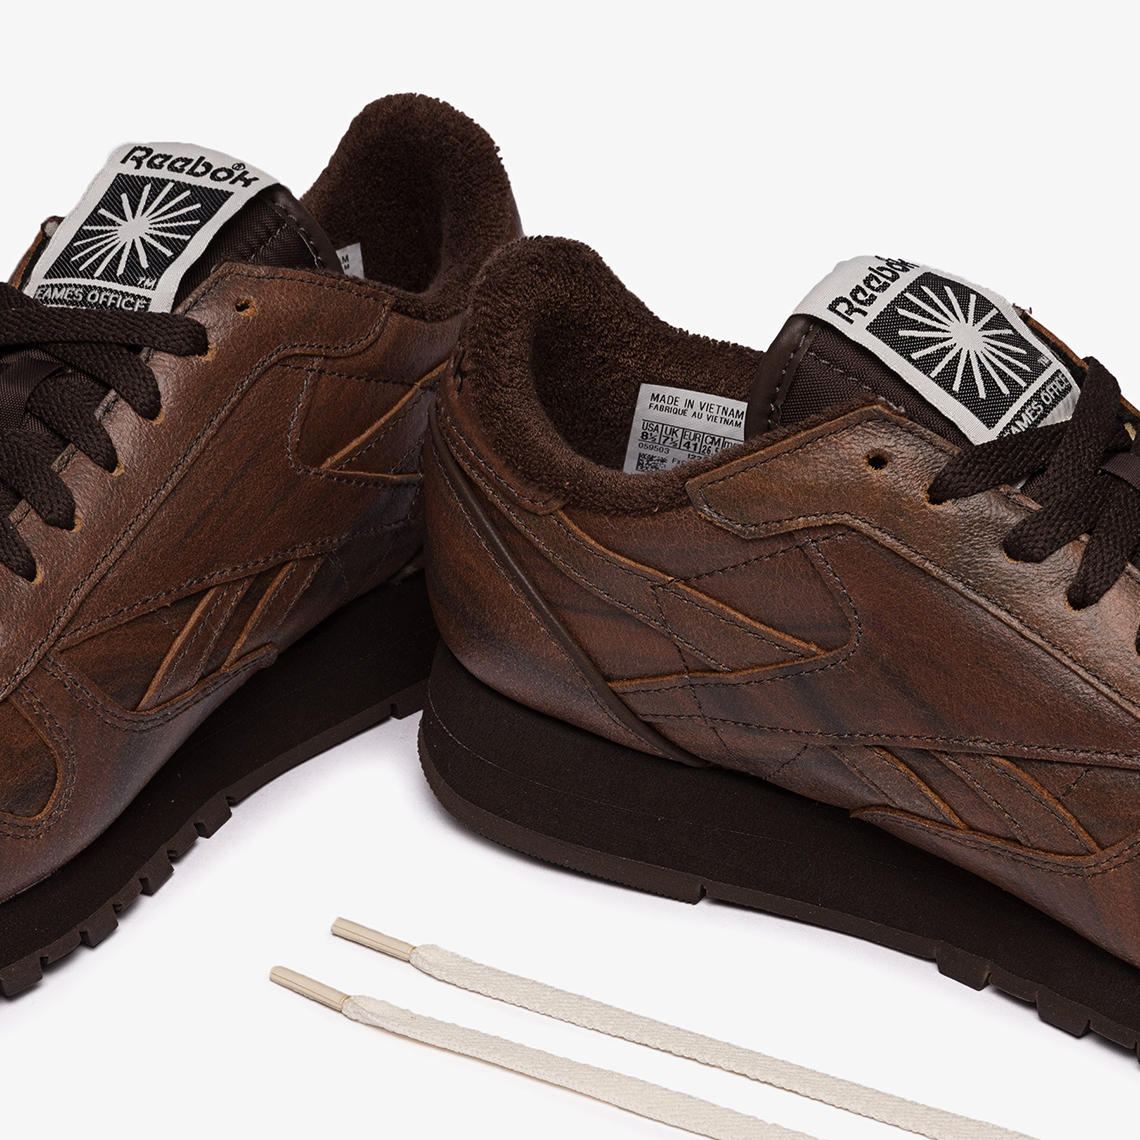 Eames Reebok Classic Leather Gy6391 3